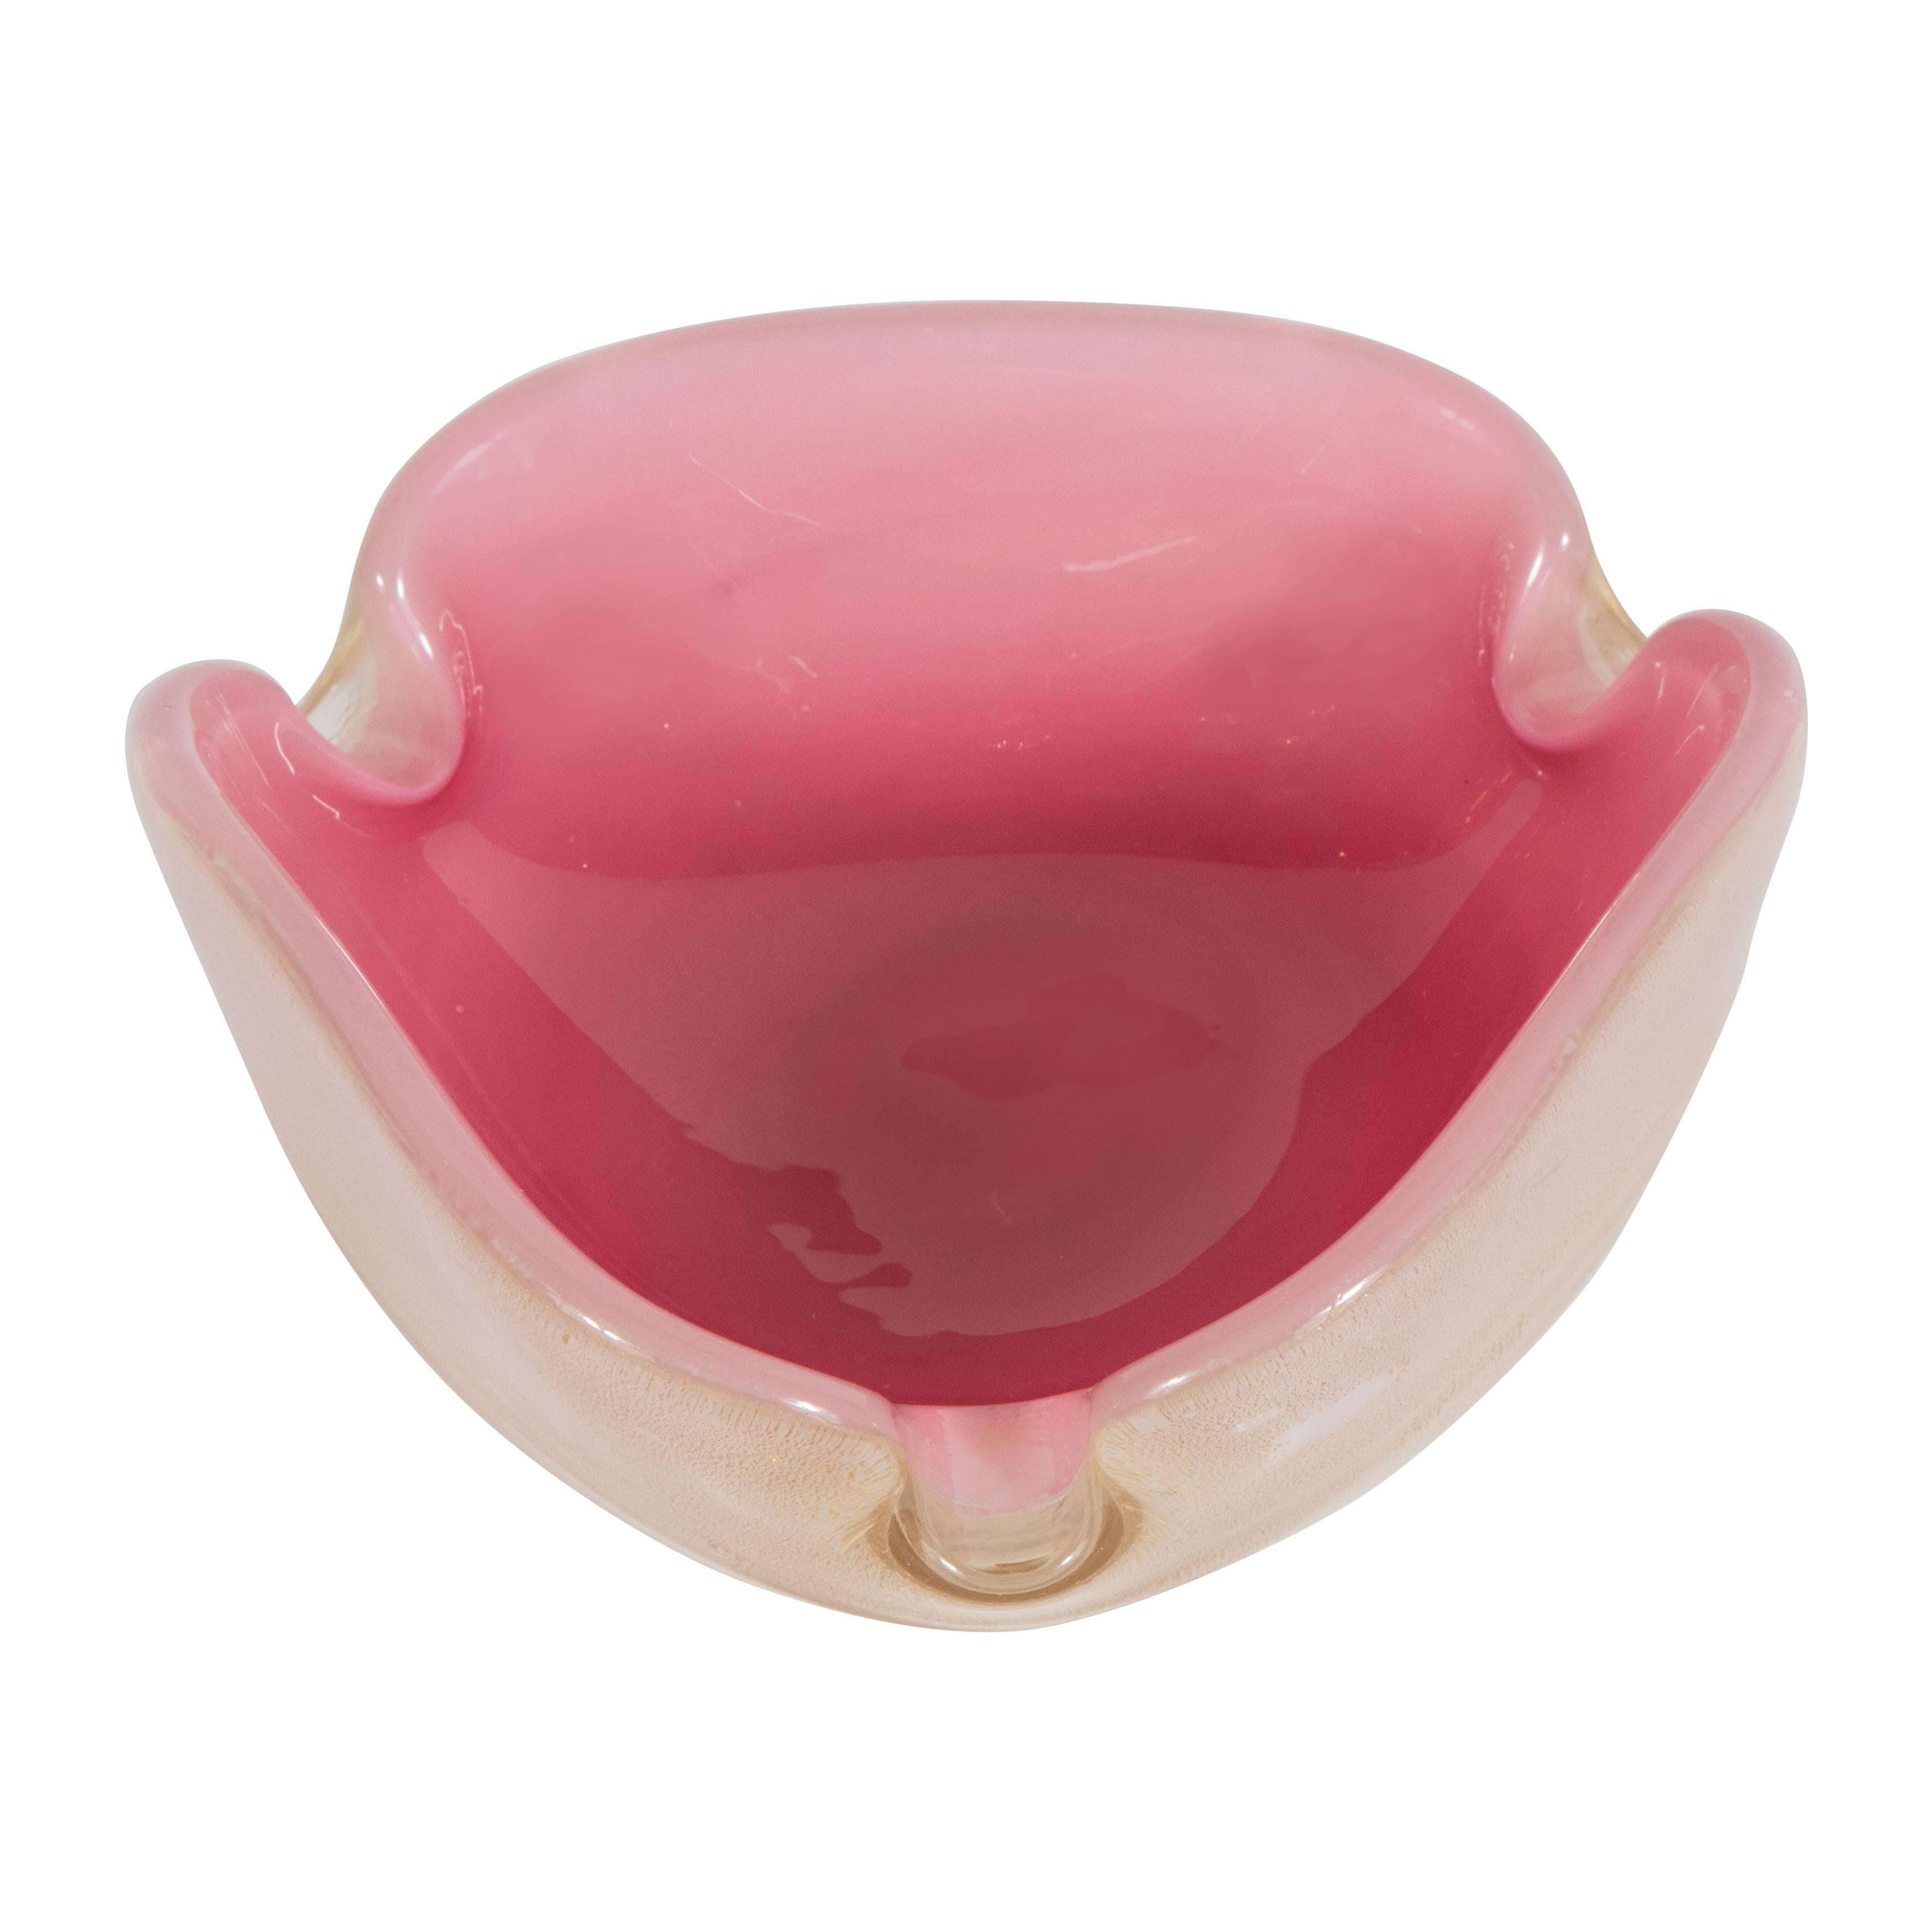 Handblown Murano Glass Ashtray in Hues of Rose and Pink with Yellow Gold